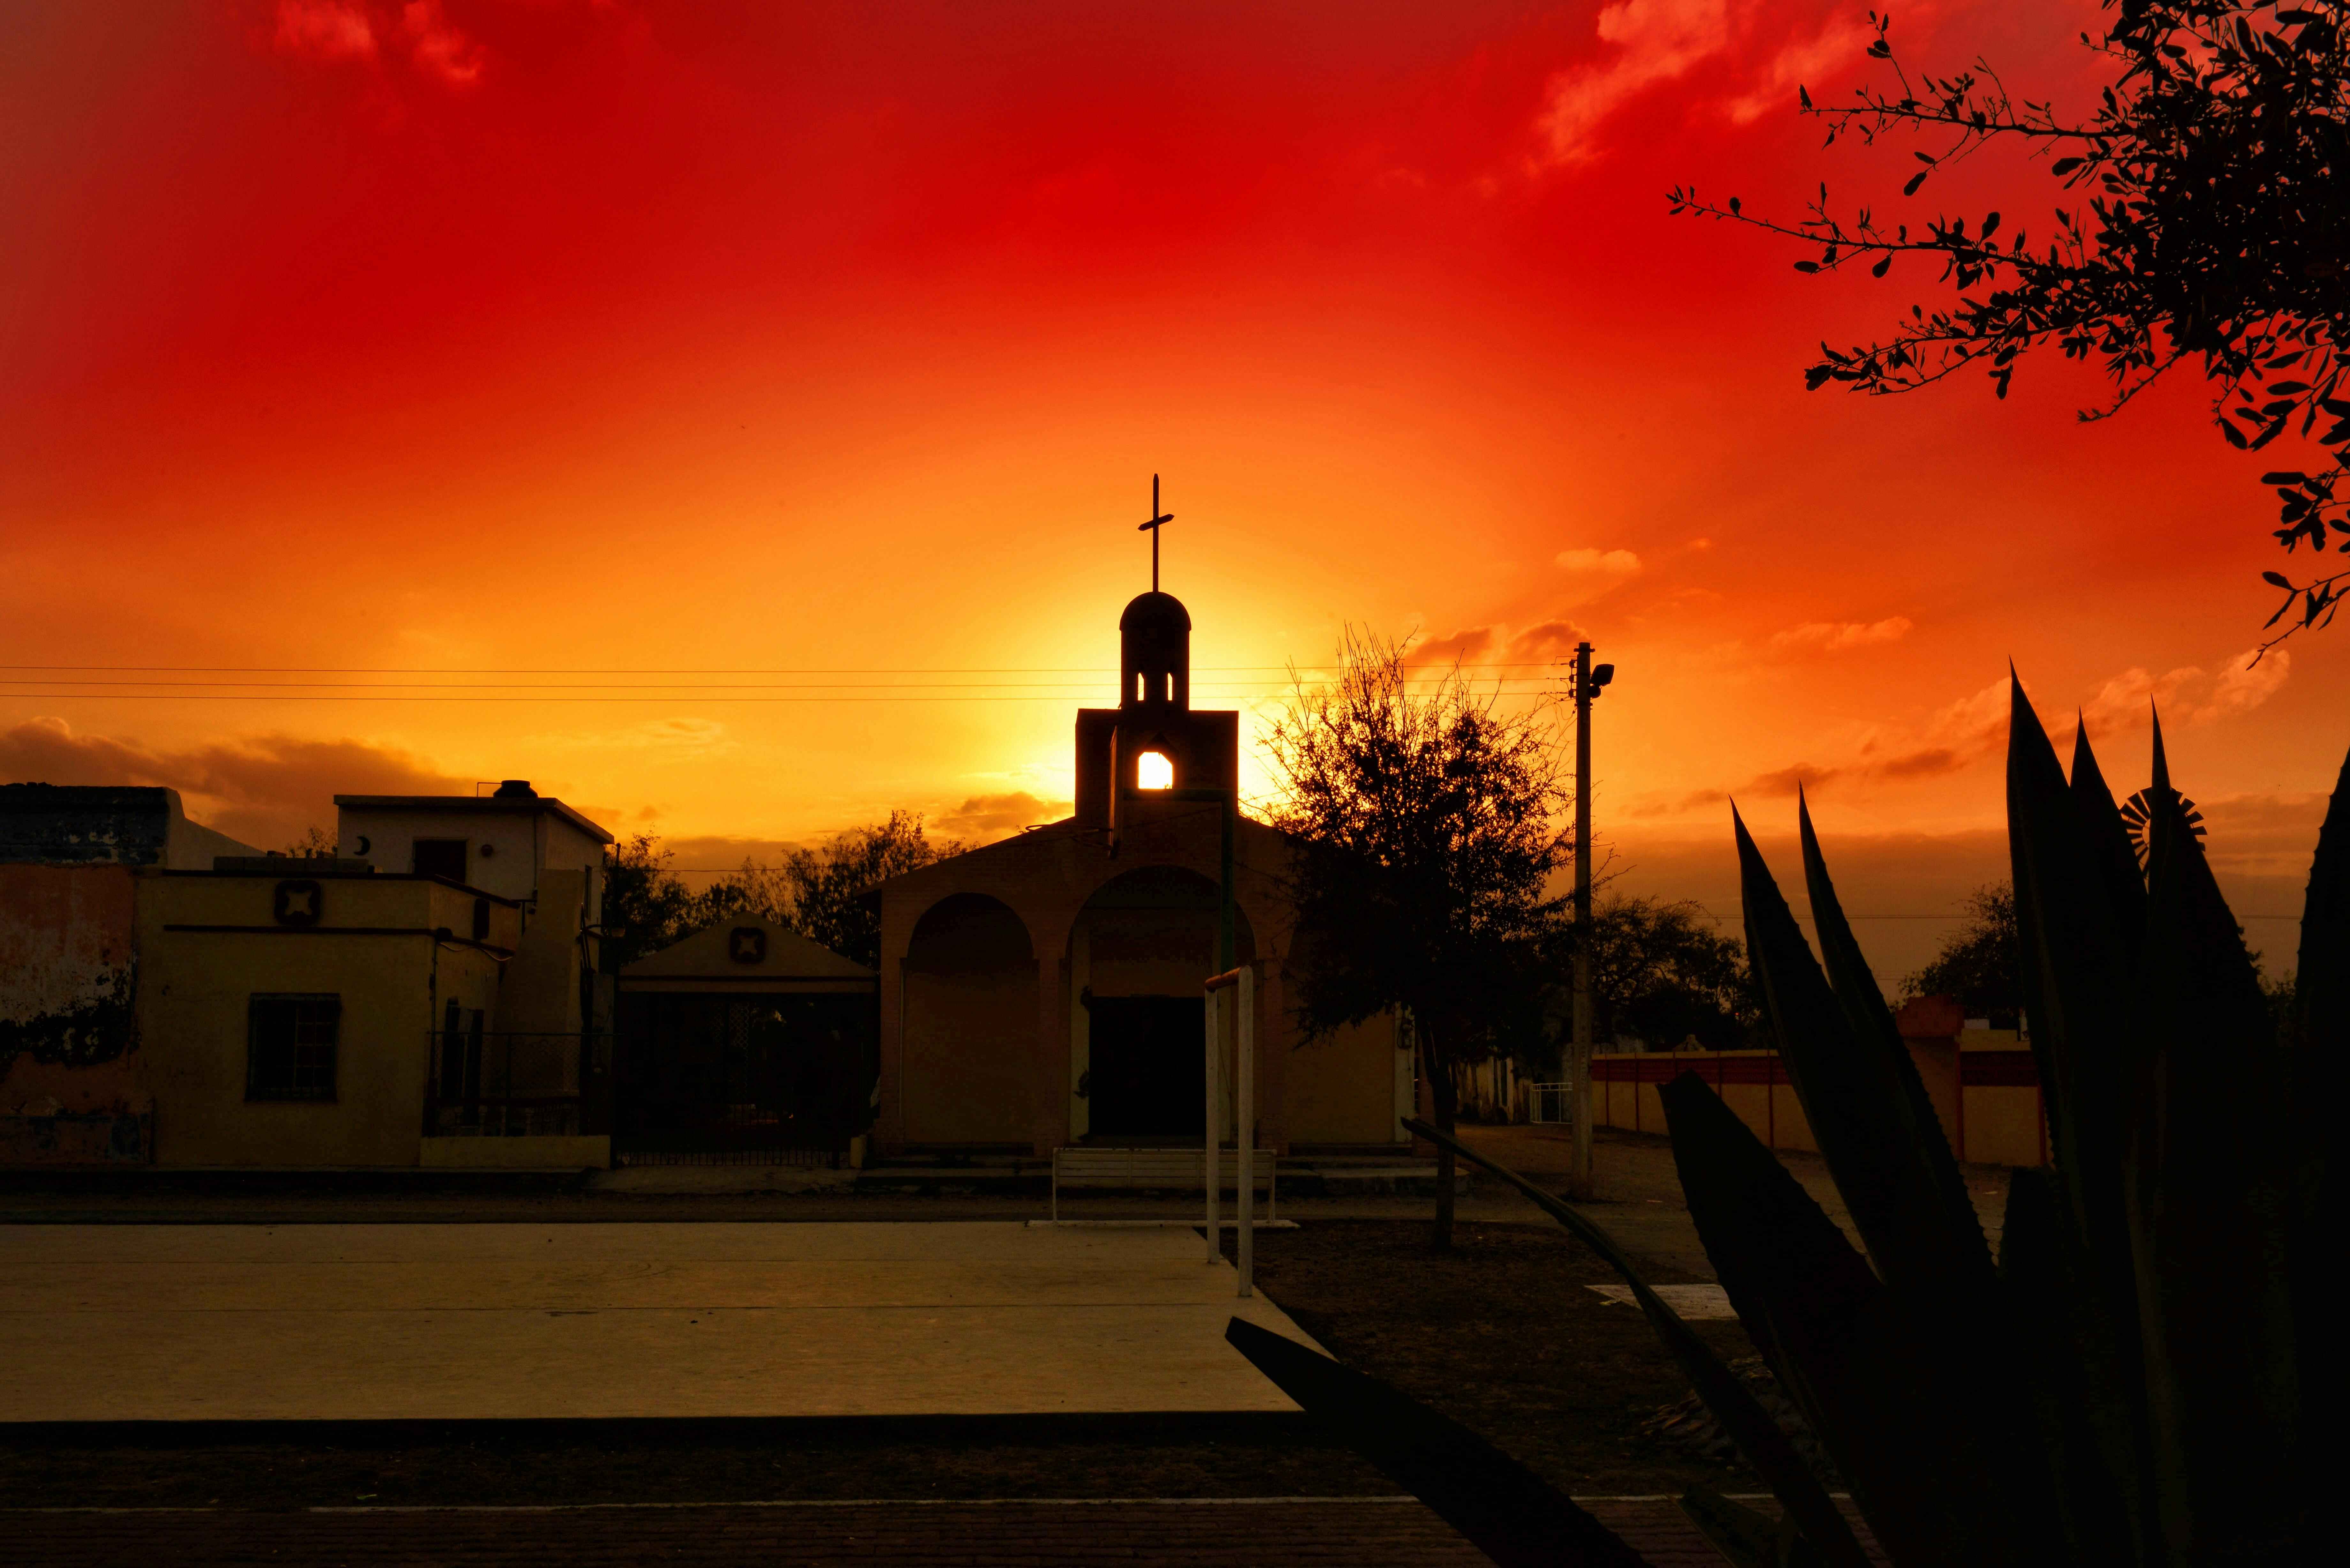 sunset over a church in mexico